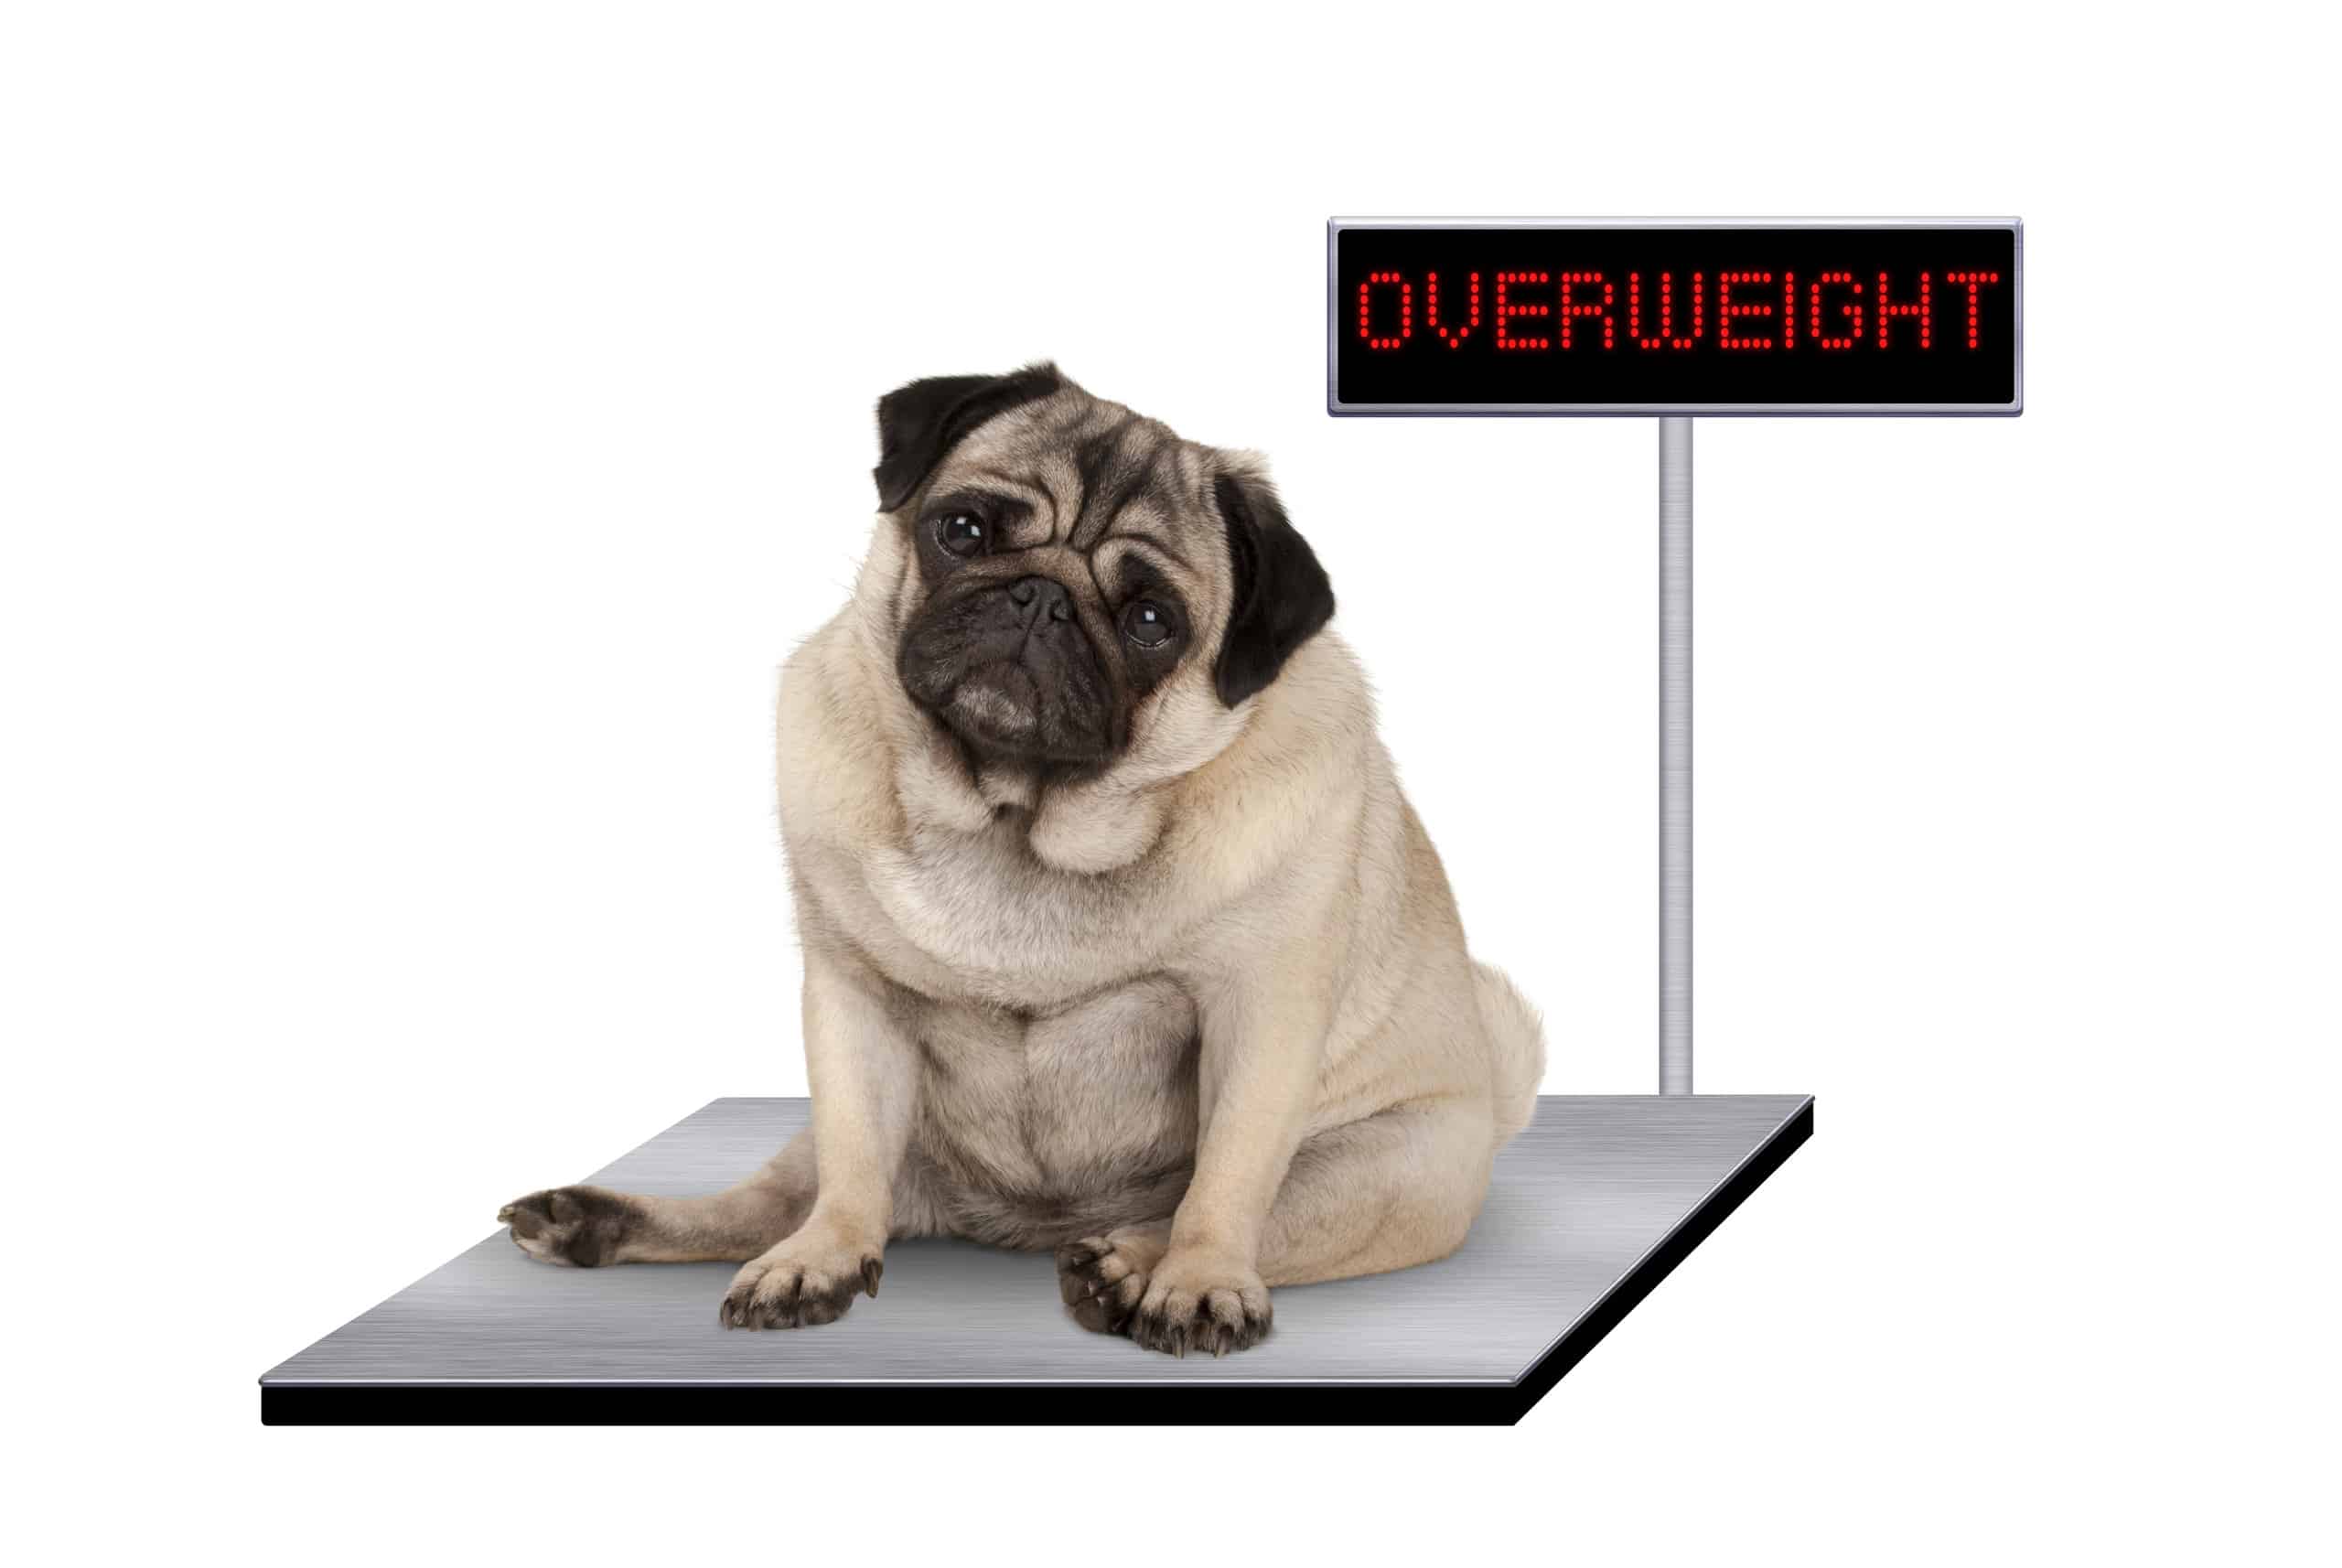 Obese pug sitting on scale that reads "Overweight"